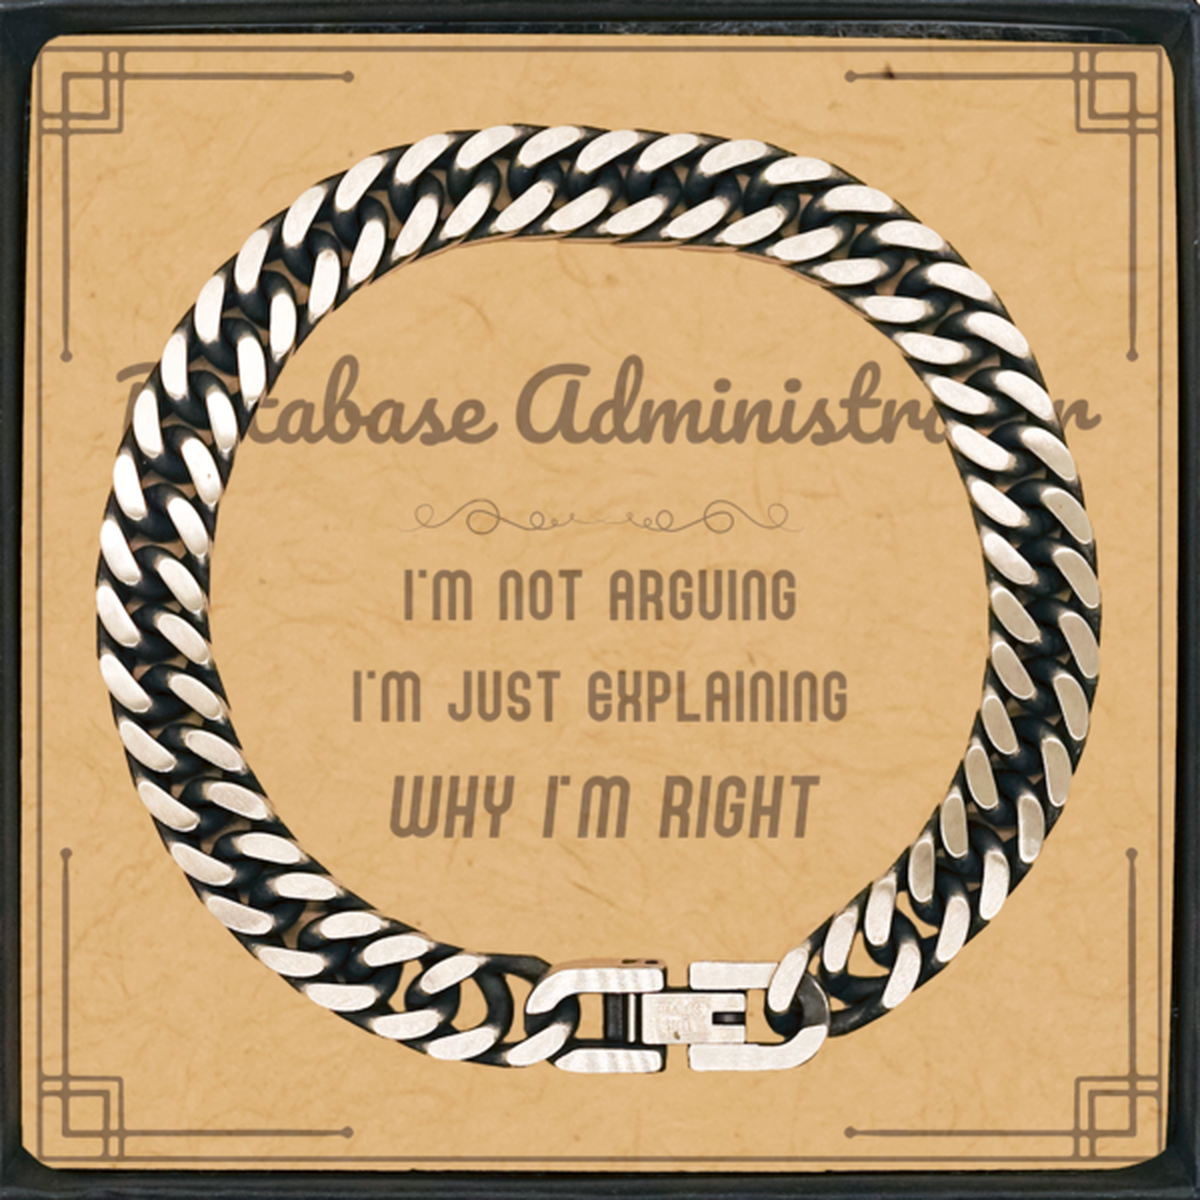 Database Administrator I'm not Arguing. I'm Just Explaining Why I'm RIGHT Cuban Link Chain Bracelet, Funny Saying Quote Database Administrator Gifts For Database Administrator Message Card Graduation Birthday Christmas Gifts for Men Women Coworker